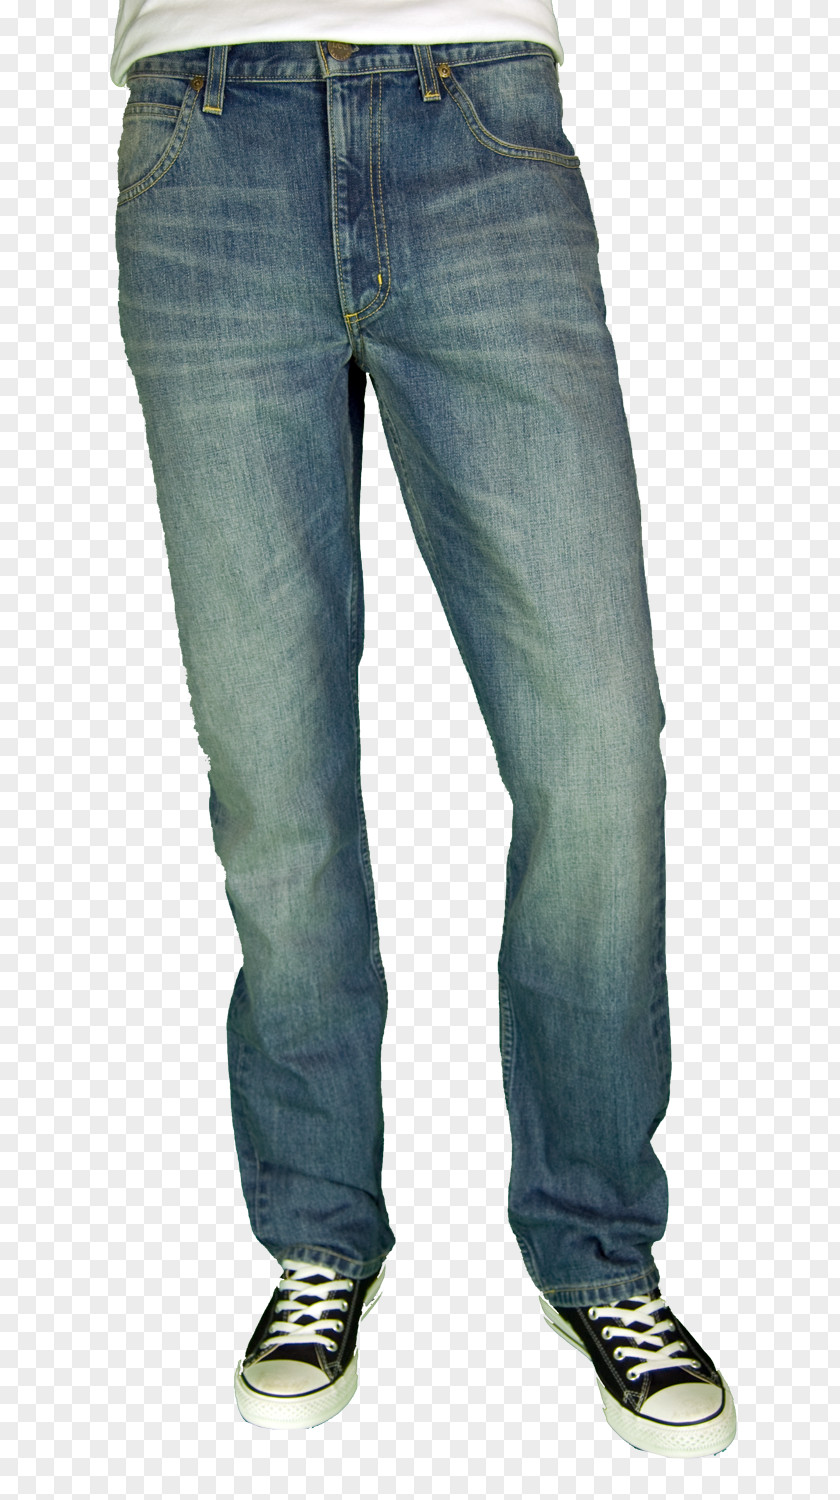 Jeans Denim Lee Cotton Chino Cloth PNG